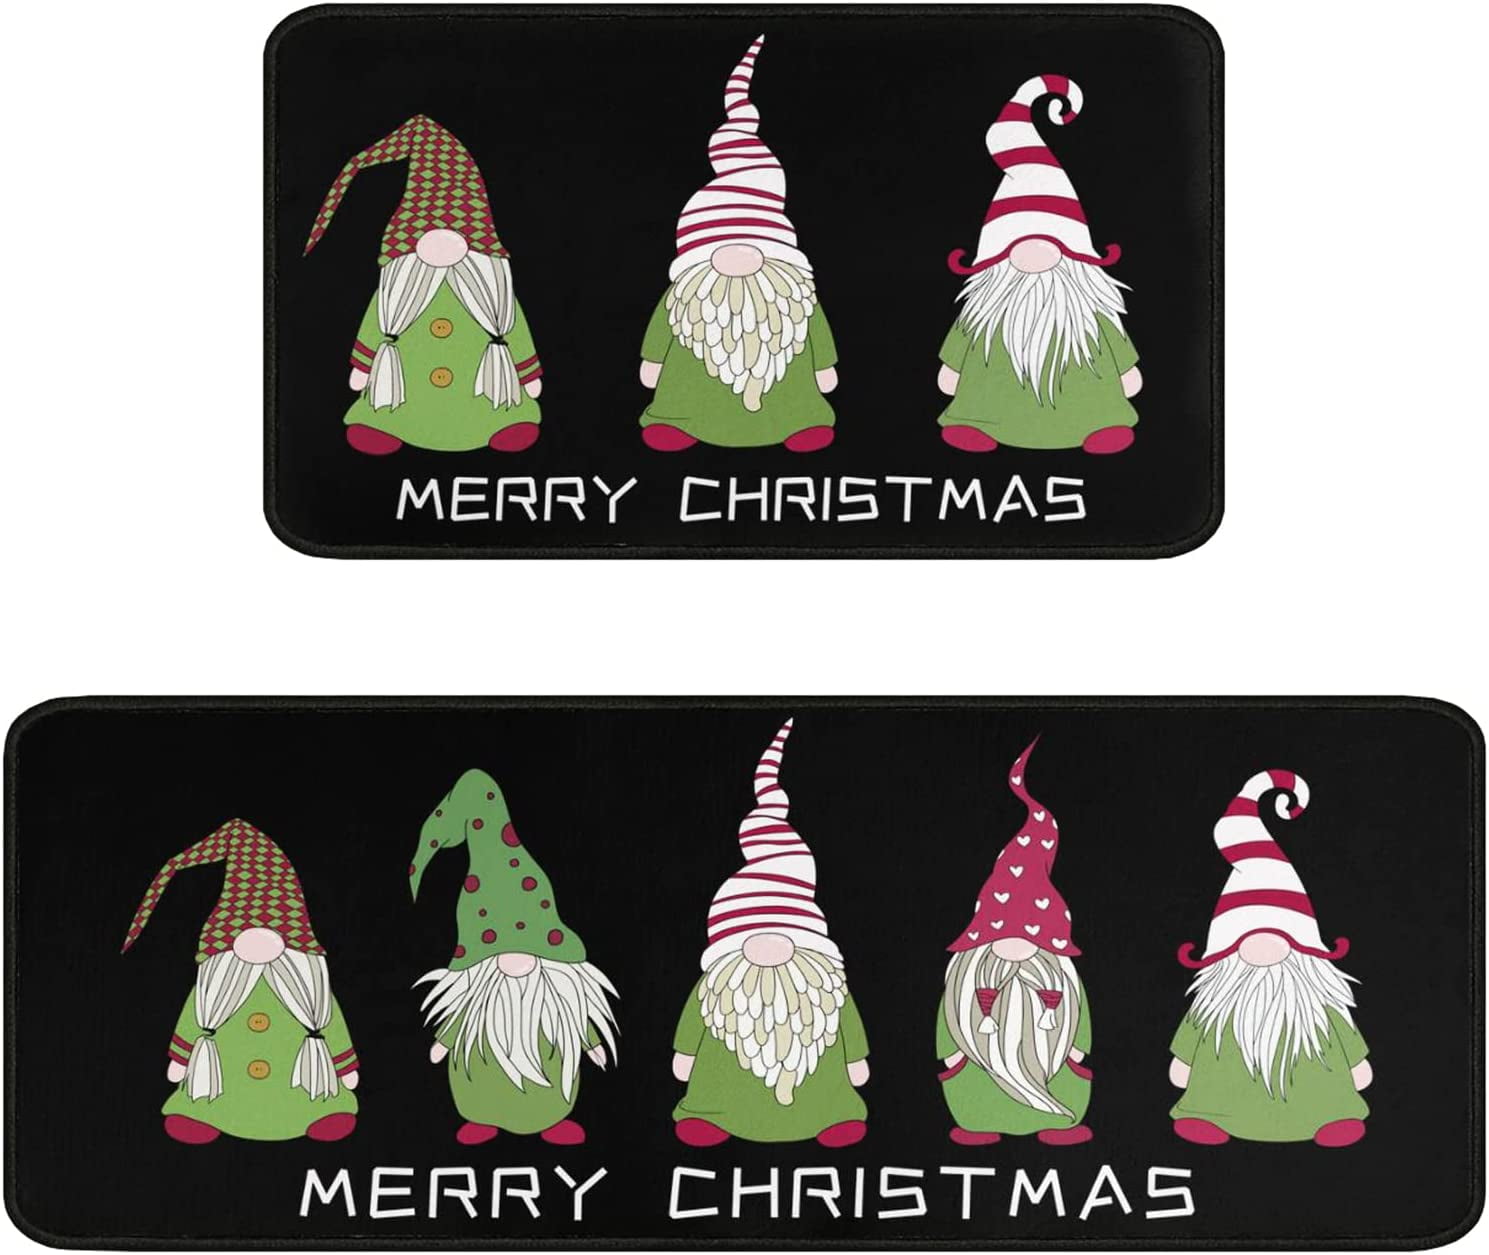  Grinch Christmas Decorations Kitchen Rugs and Mats Set of 2,  The Grinch Decor of Winter Holiday Party and Home Kitchen, Non-Slip,  Washable, Stain and Fade Resistant, Size (17x30 and 17x47 inch) 